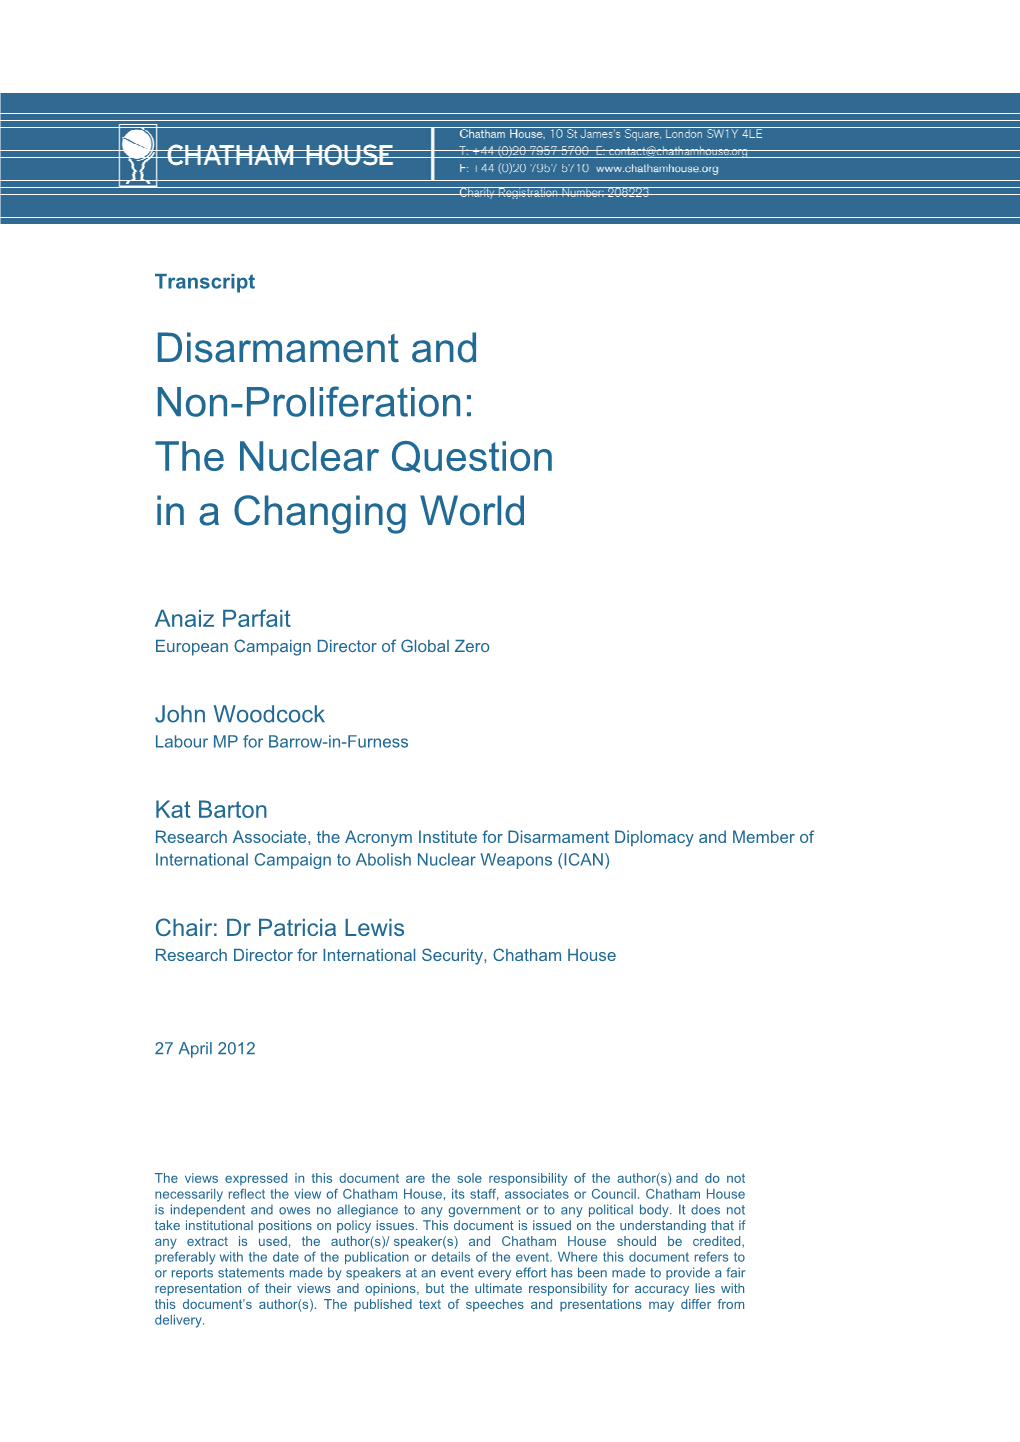 Disarmament and Non-Proliferation: the Nuclear Question in a Changing World